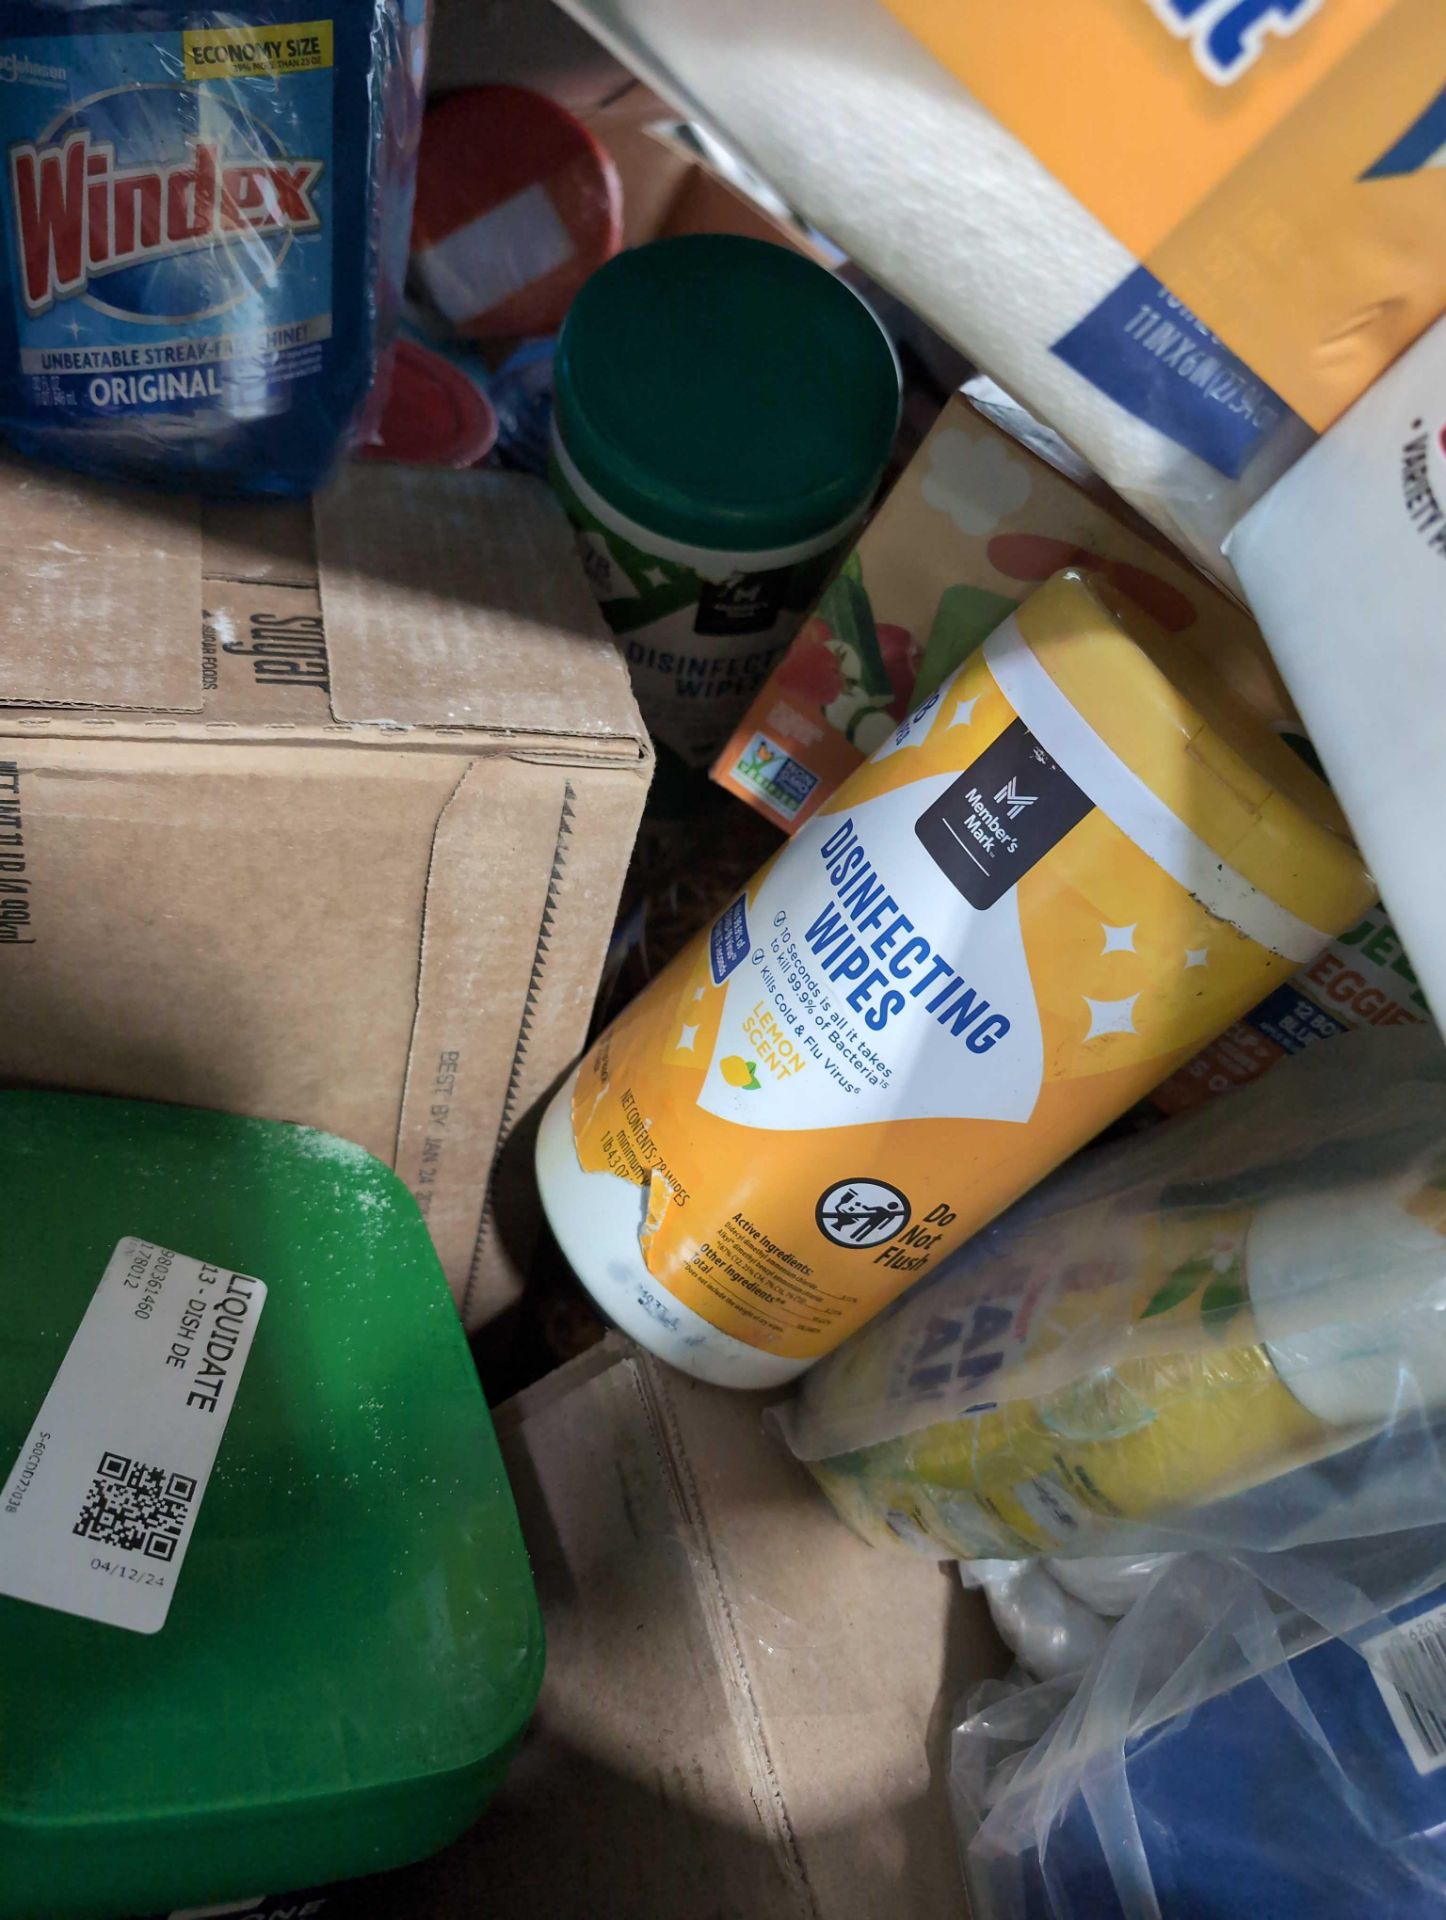 Big box store in a box: Canned chicke, Paper towels, baket chips, ketchup, trash liners, Cubii seate - Image 12 of 14